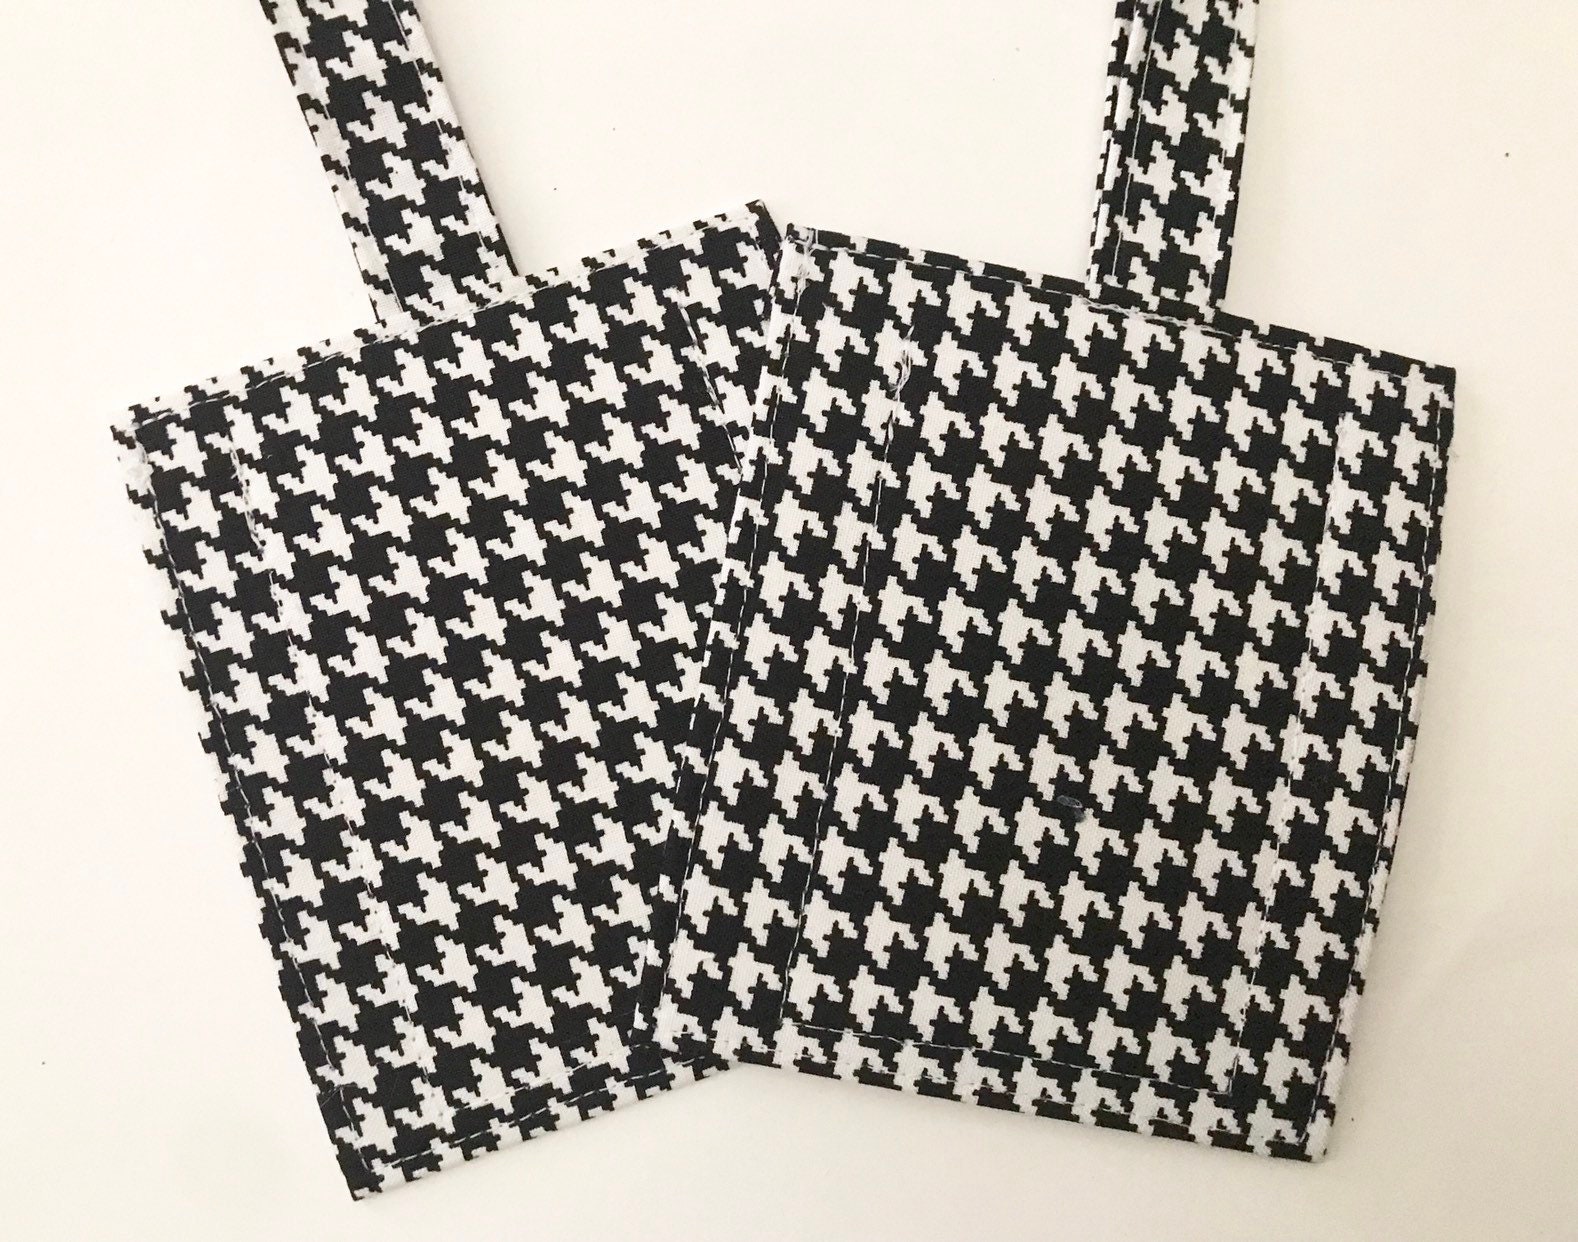 Houndstooth Tote with Cosmetic Bag Insert - St. Jude Gift Shop